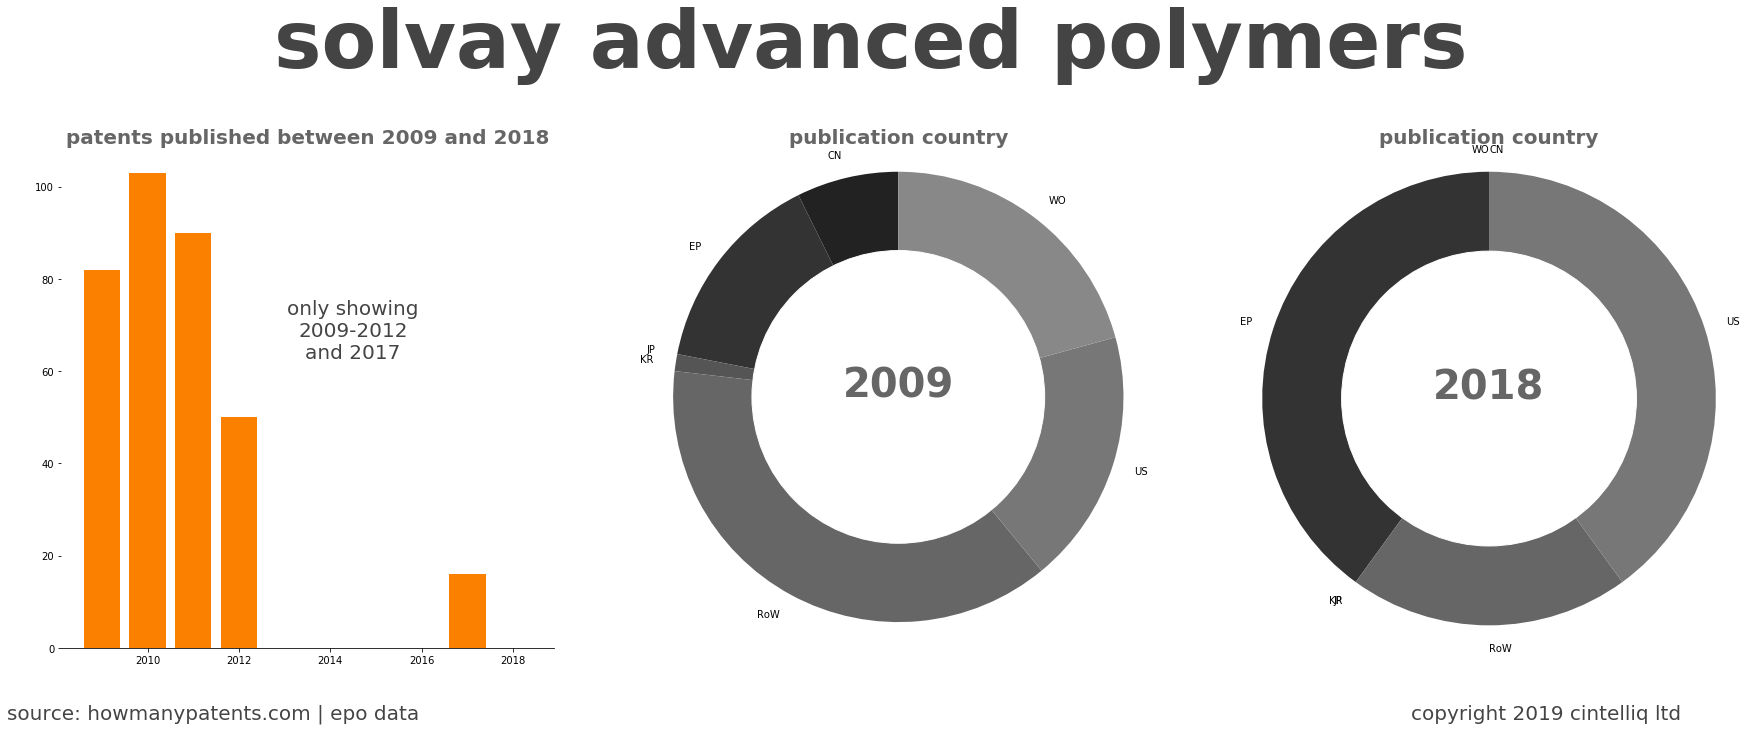 summary of patents for Solvay Advanced Polymers